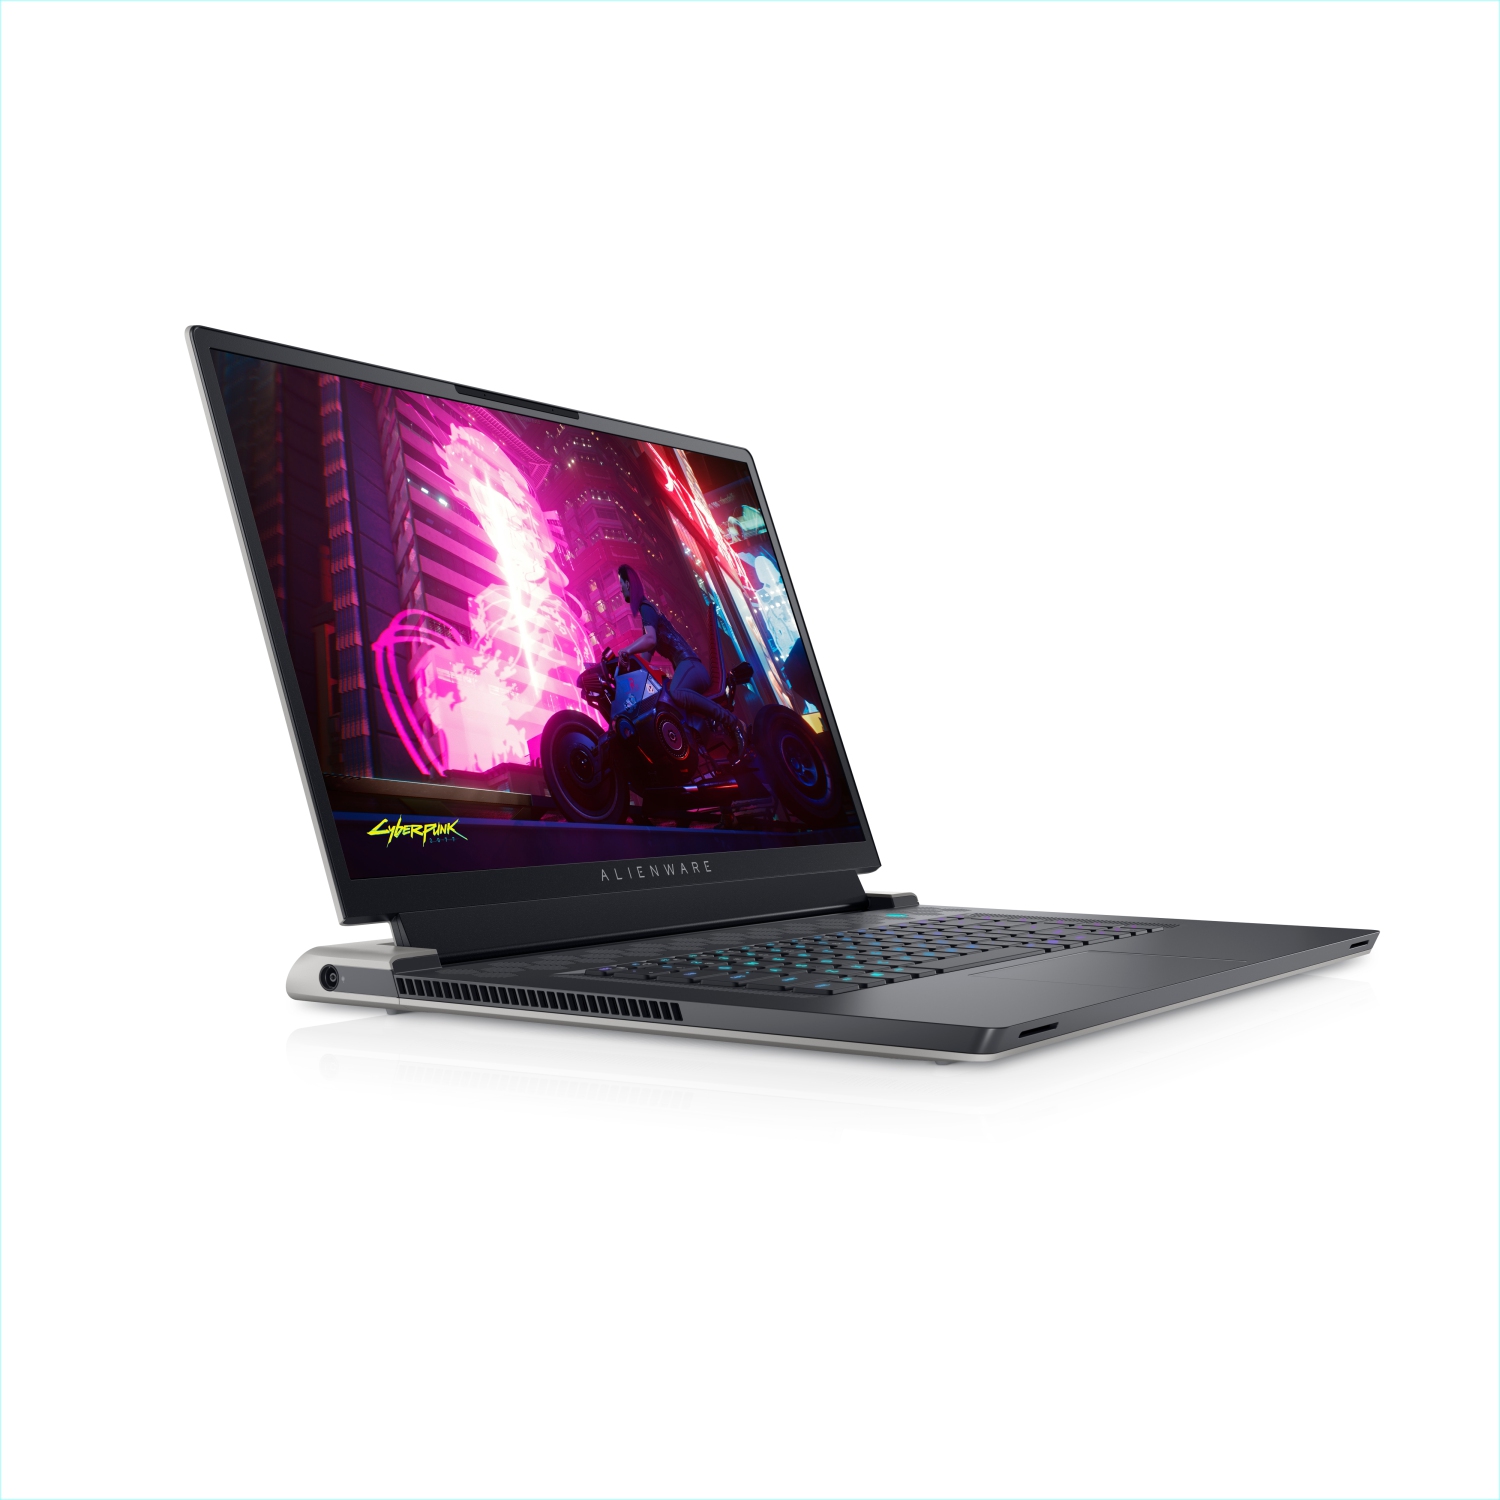 Refurbished (Excellent) - Dell Alienware X17 R1 Gaming Laptop (2021), 17.3" 4K, Core i7, 512GB SSD, 16GB RAM, RTX 3070, 8 Cores @ 4.6 GHz, 11th Gen CPU Certified